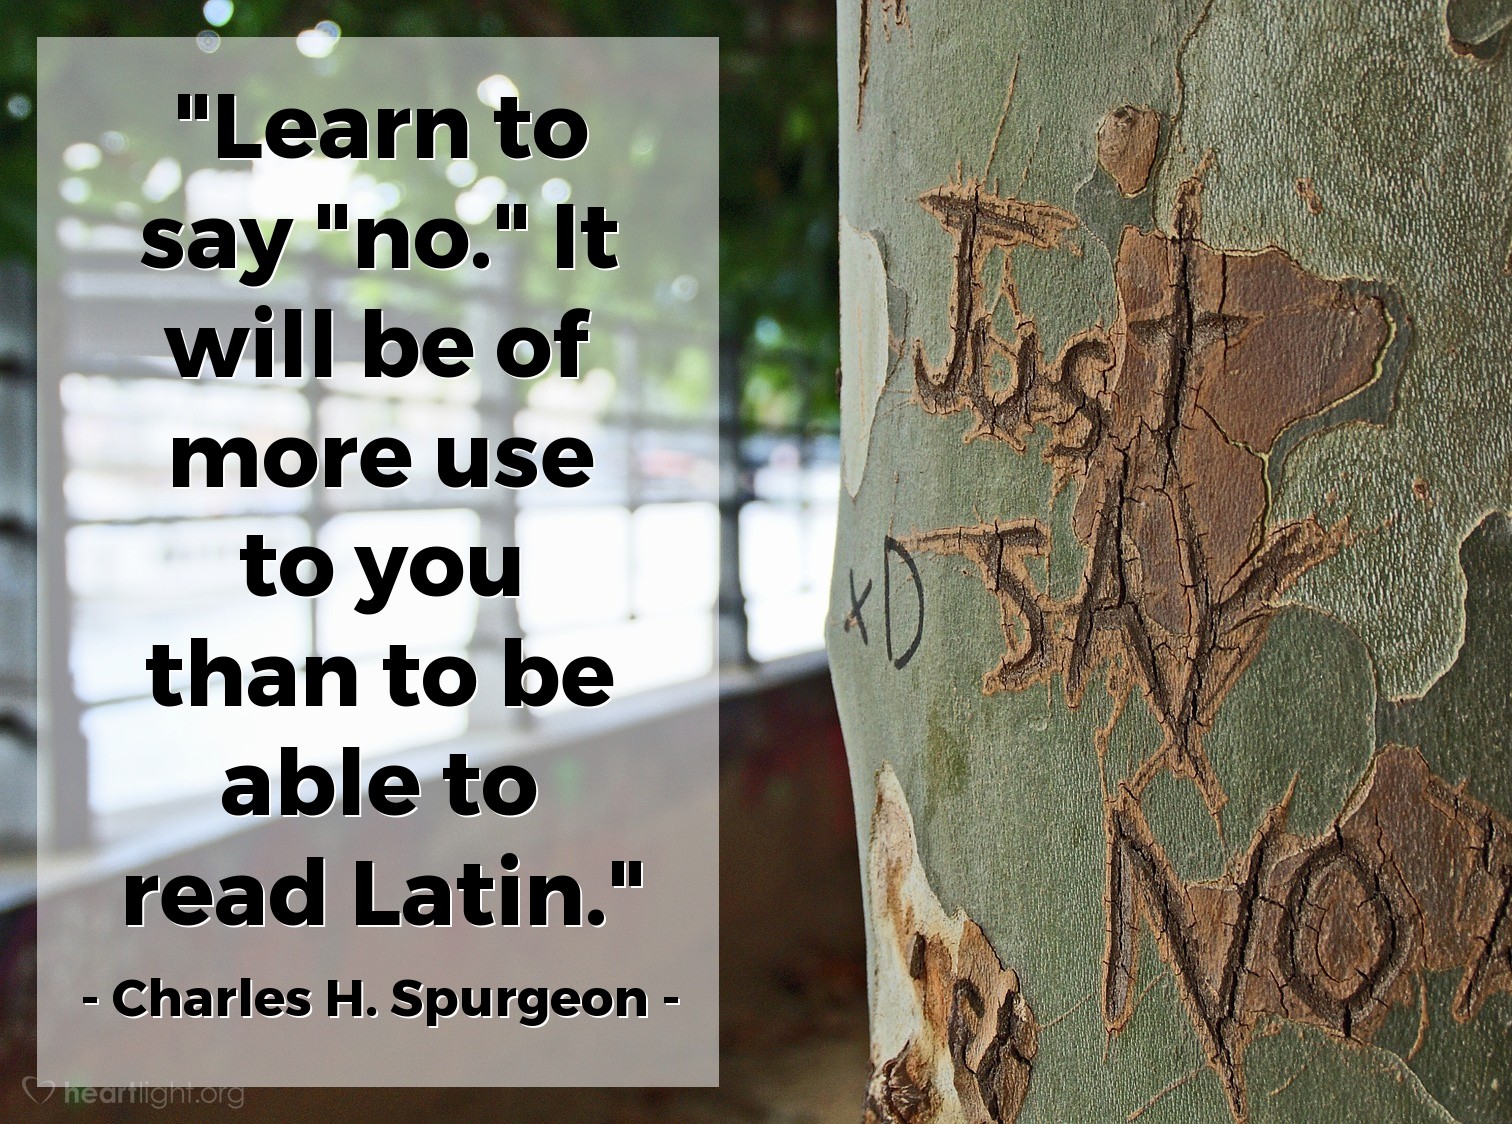 Illustration of Charles H. Spurgeon — "Learn to say "no." It will be of more use to you than to be able to read Latin."